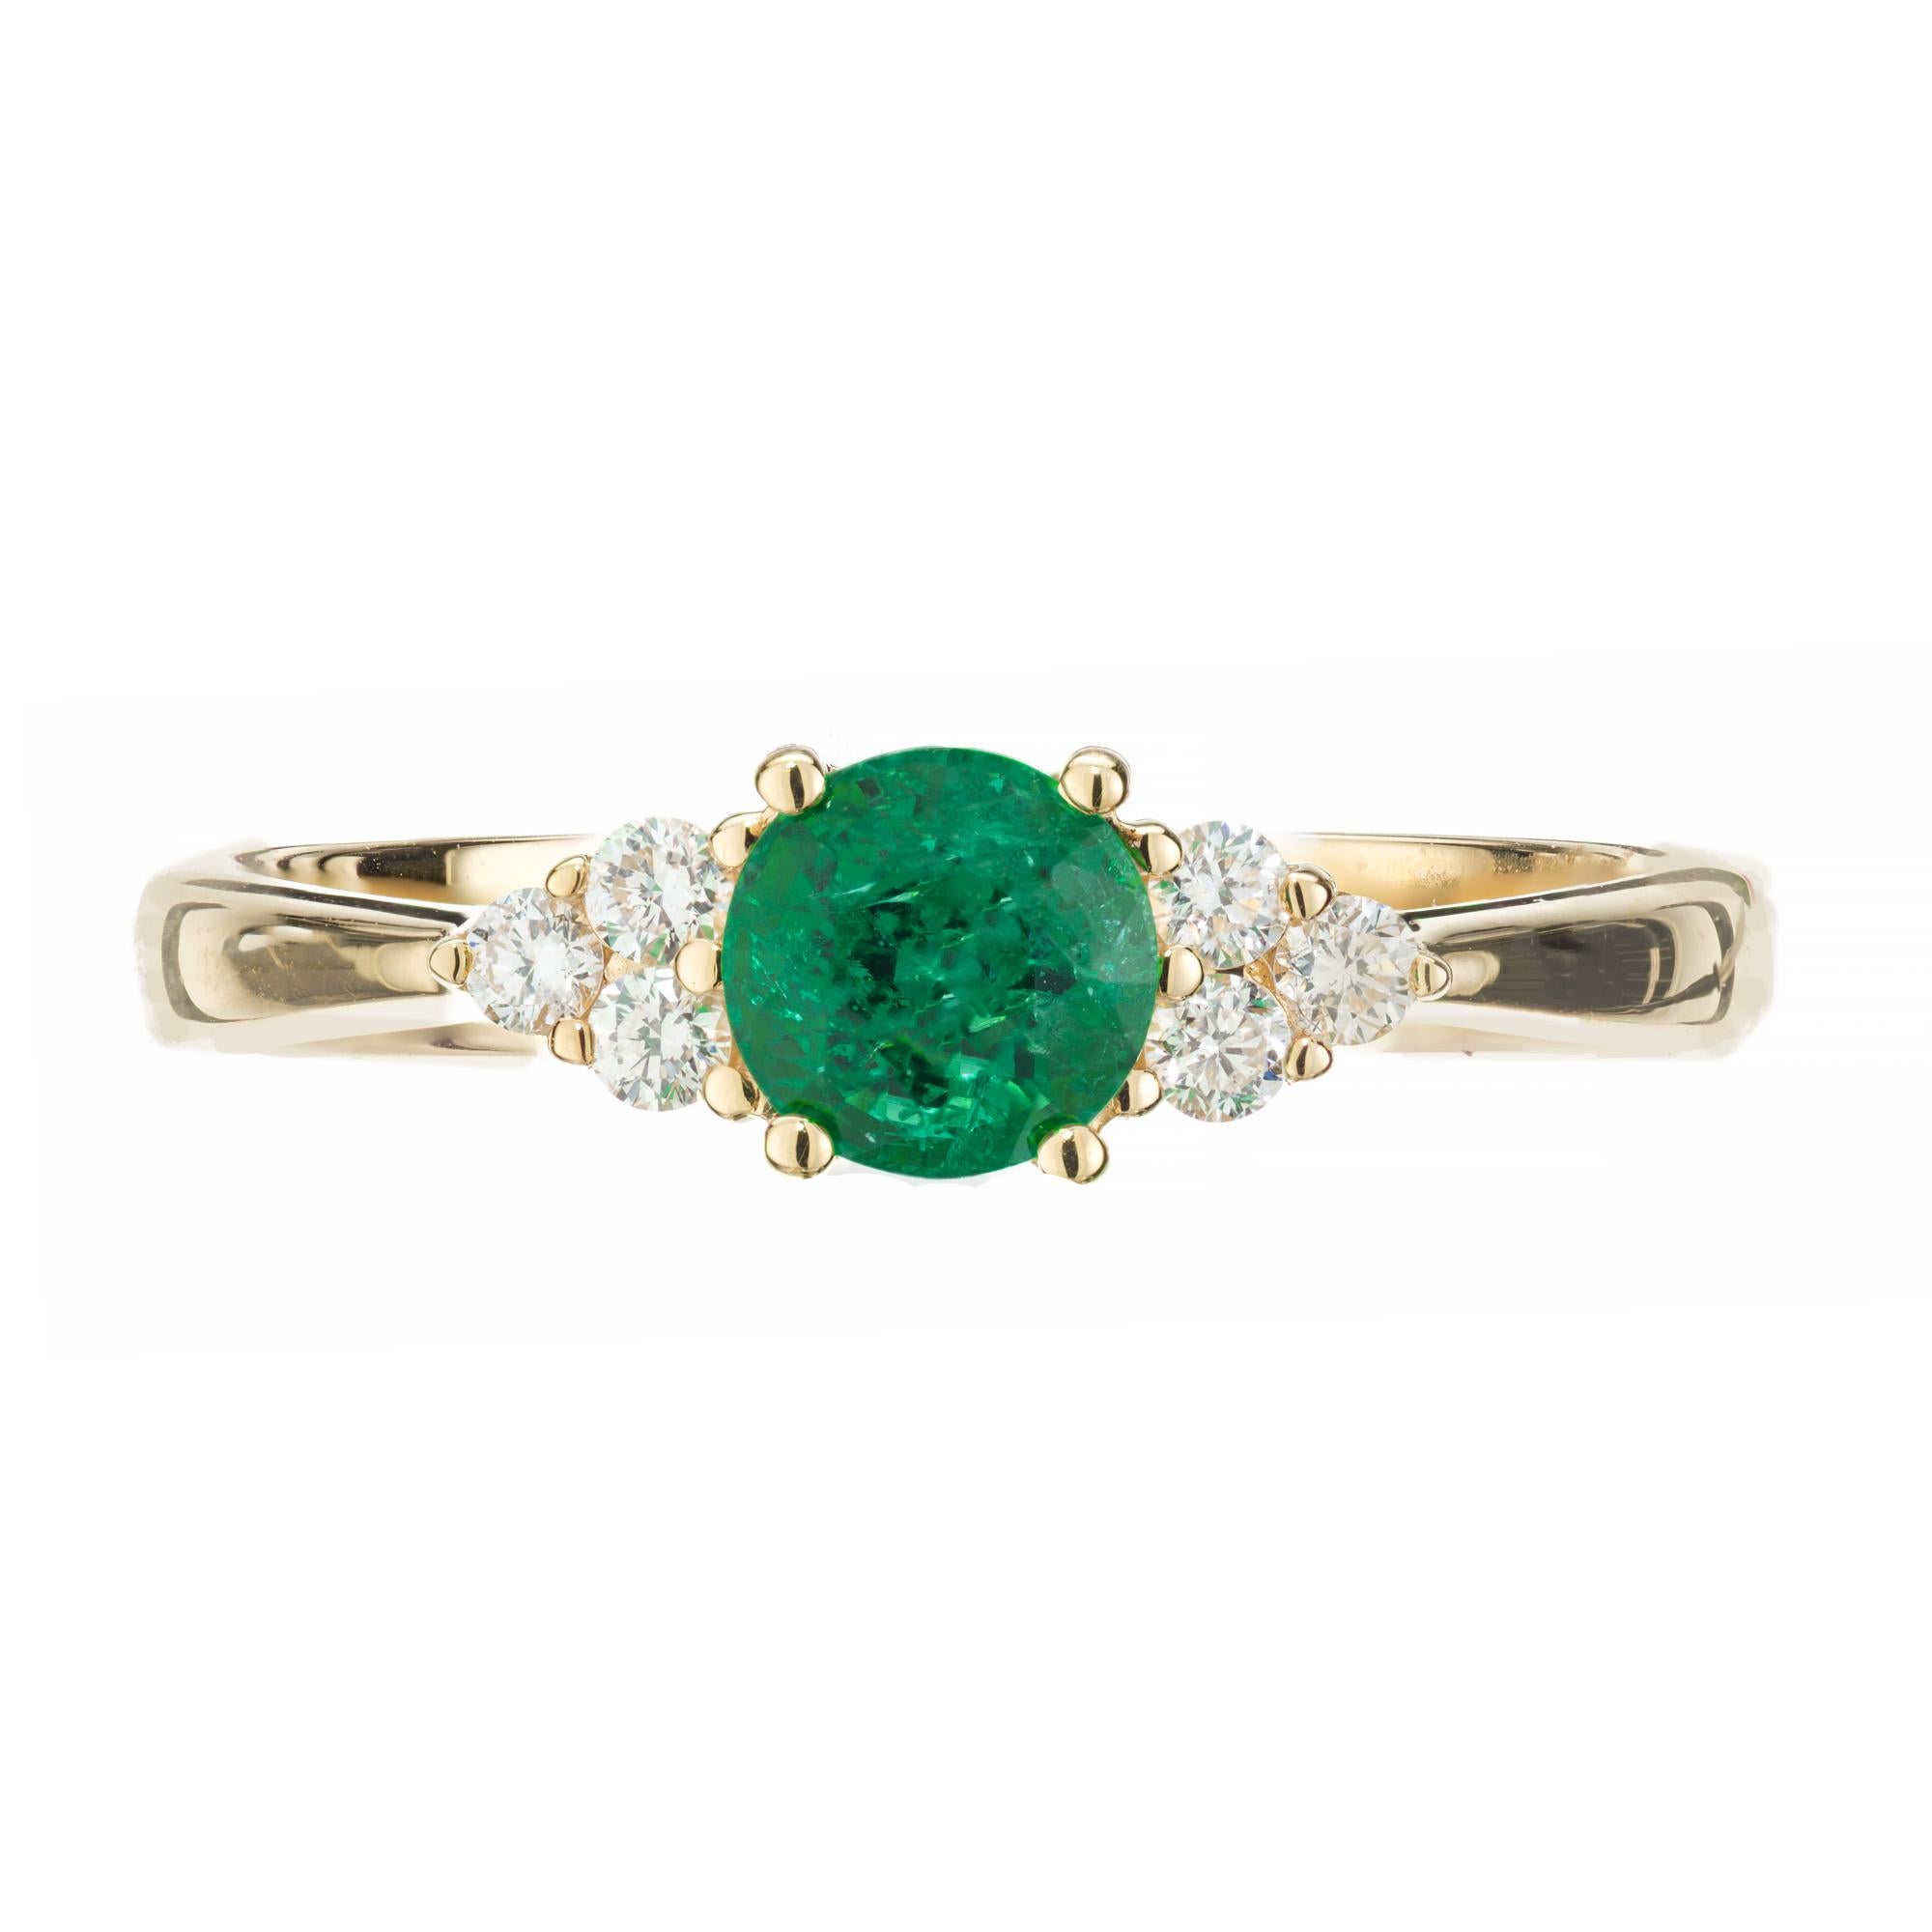 Emerald and diamond engagement ring. .58ct bright green round round emerald center stone set in at 18k yellow gold setting complemented with 3 round cut diamonds on each side of the stone. Designed and crafted in the Peter Suchy Workshop.

1 round